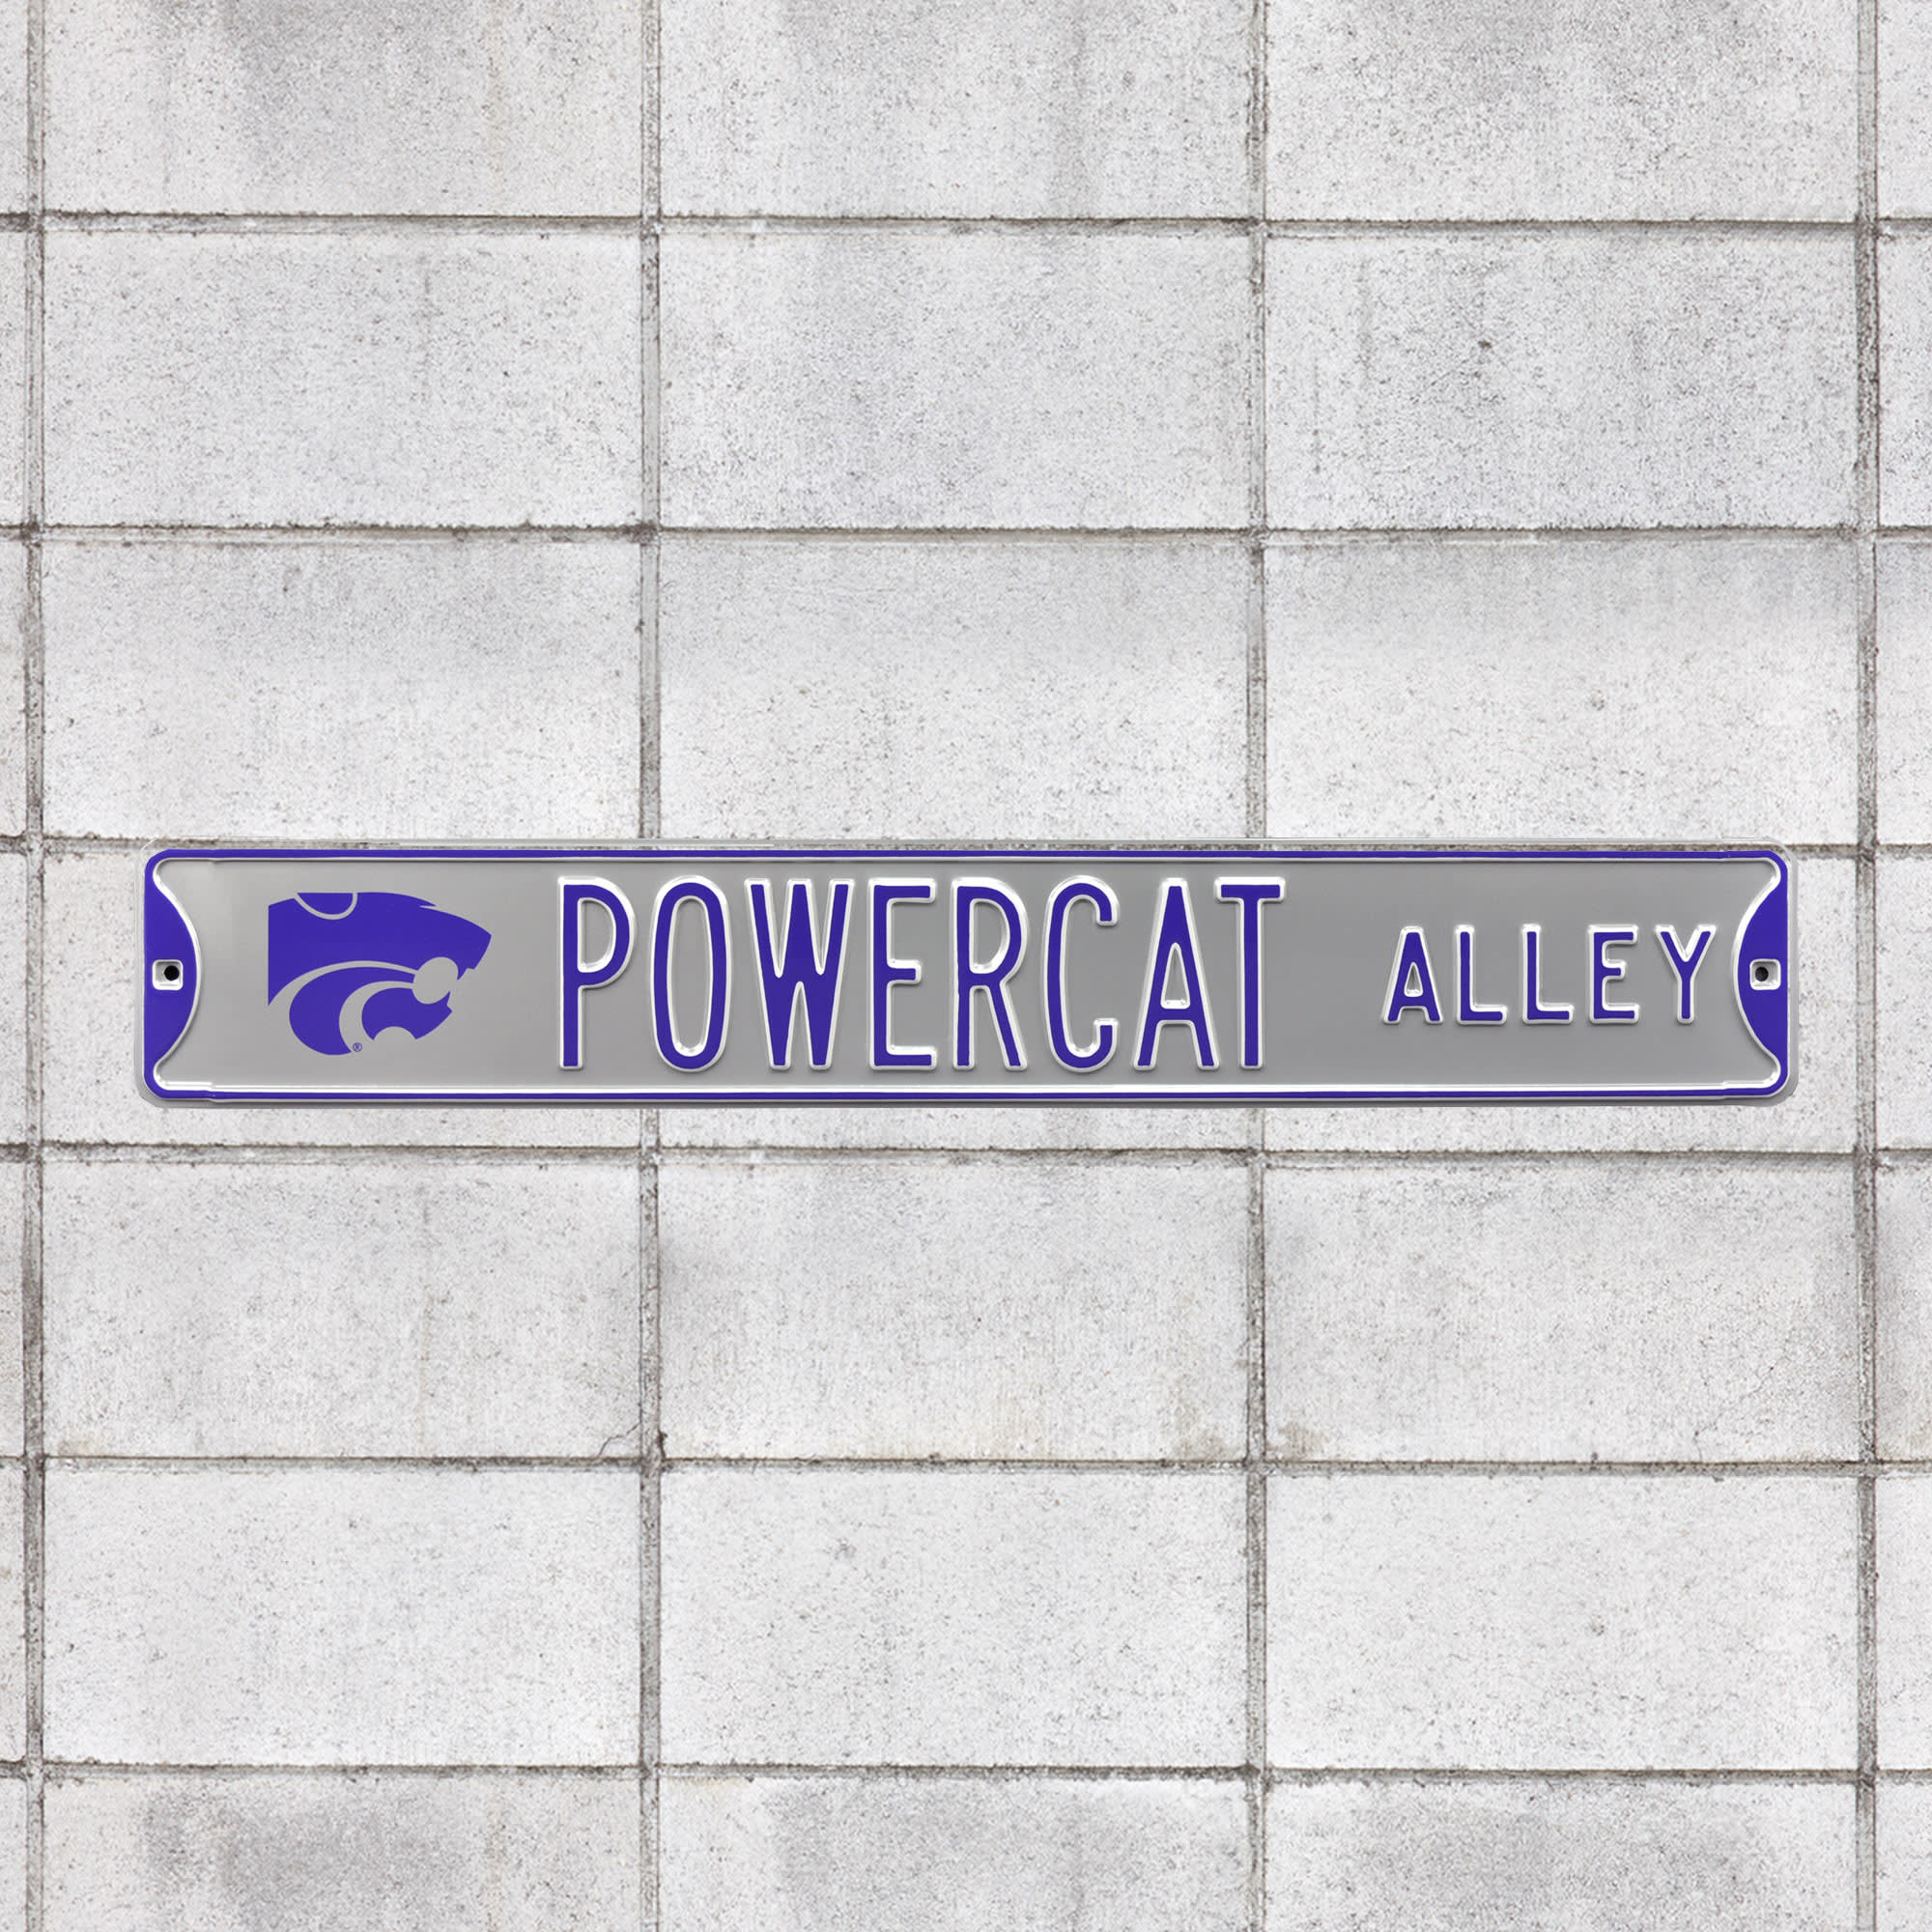 Kansas State Wildcats: Powercat Alley - Officially Licensed Metal Street Sign 36.0"W x 6.0"H by Fathead | 100% Steel